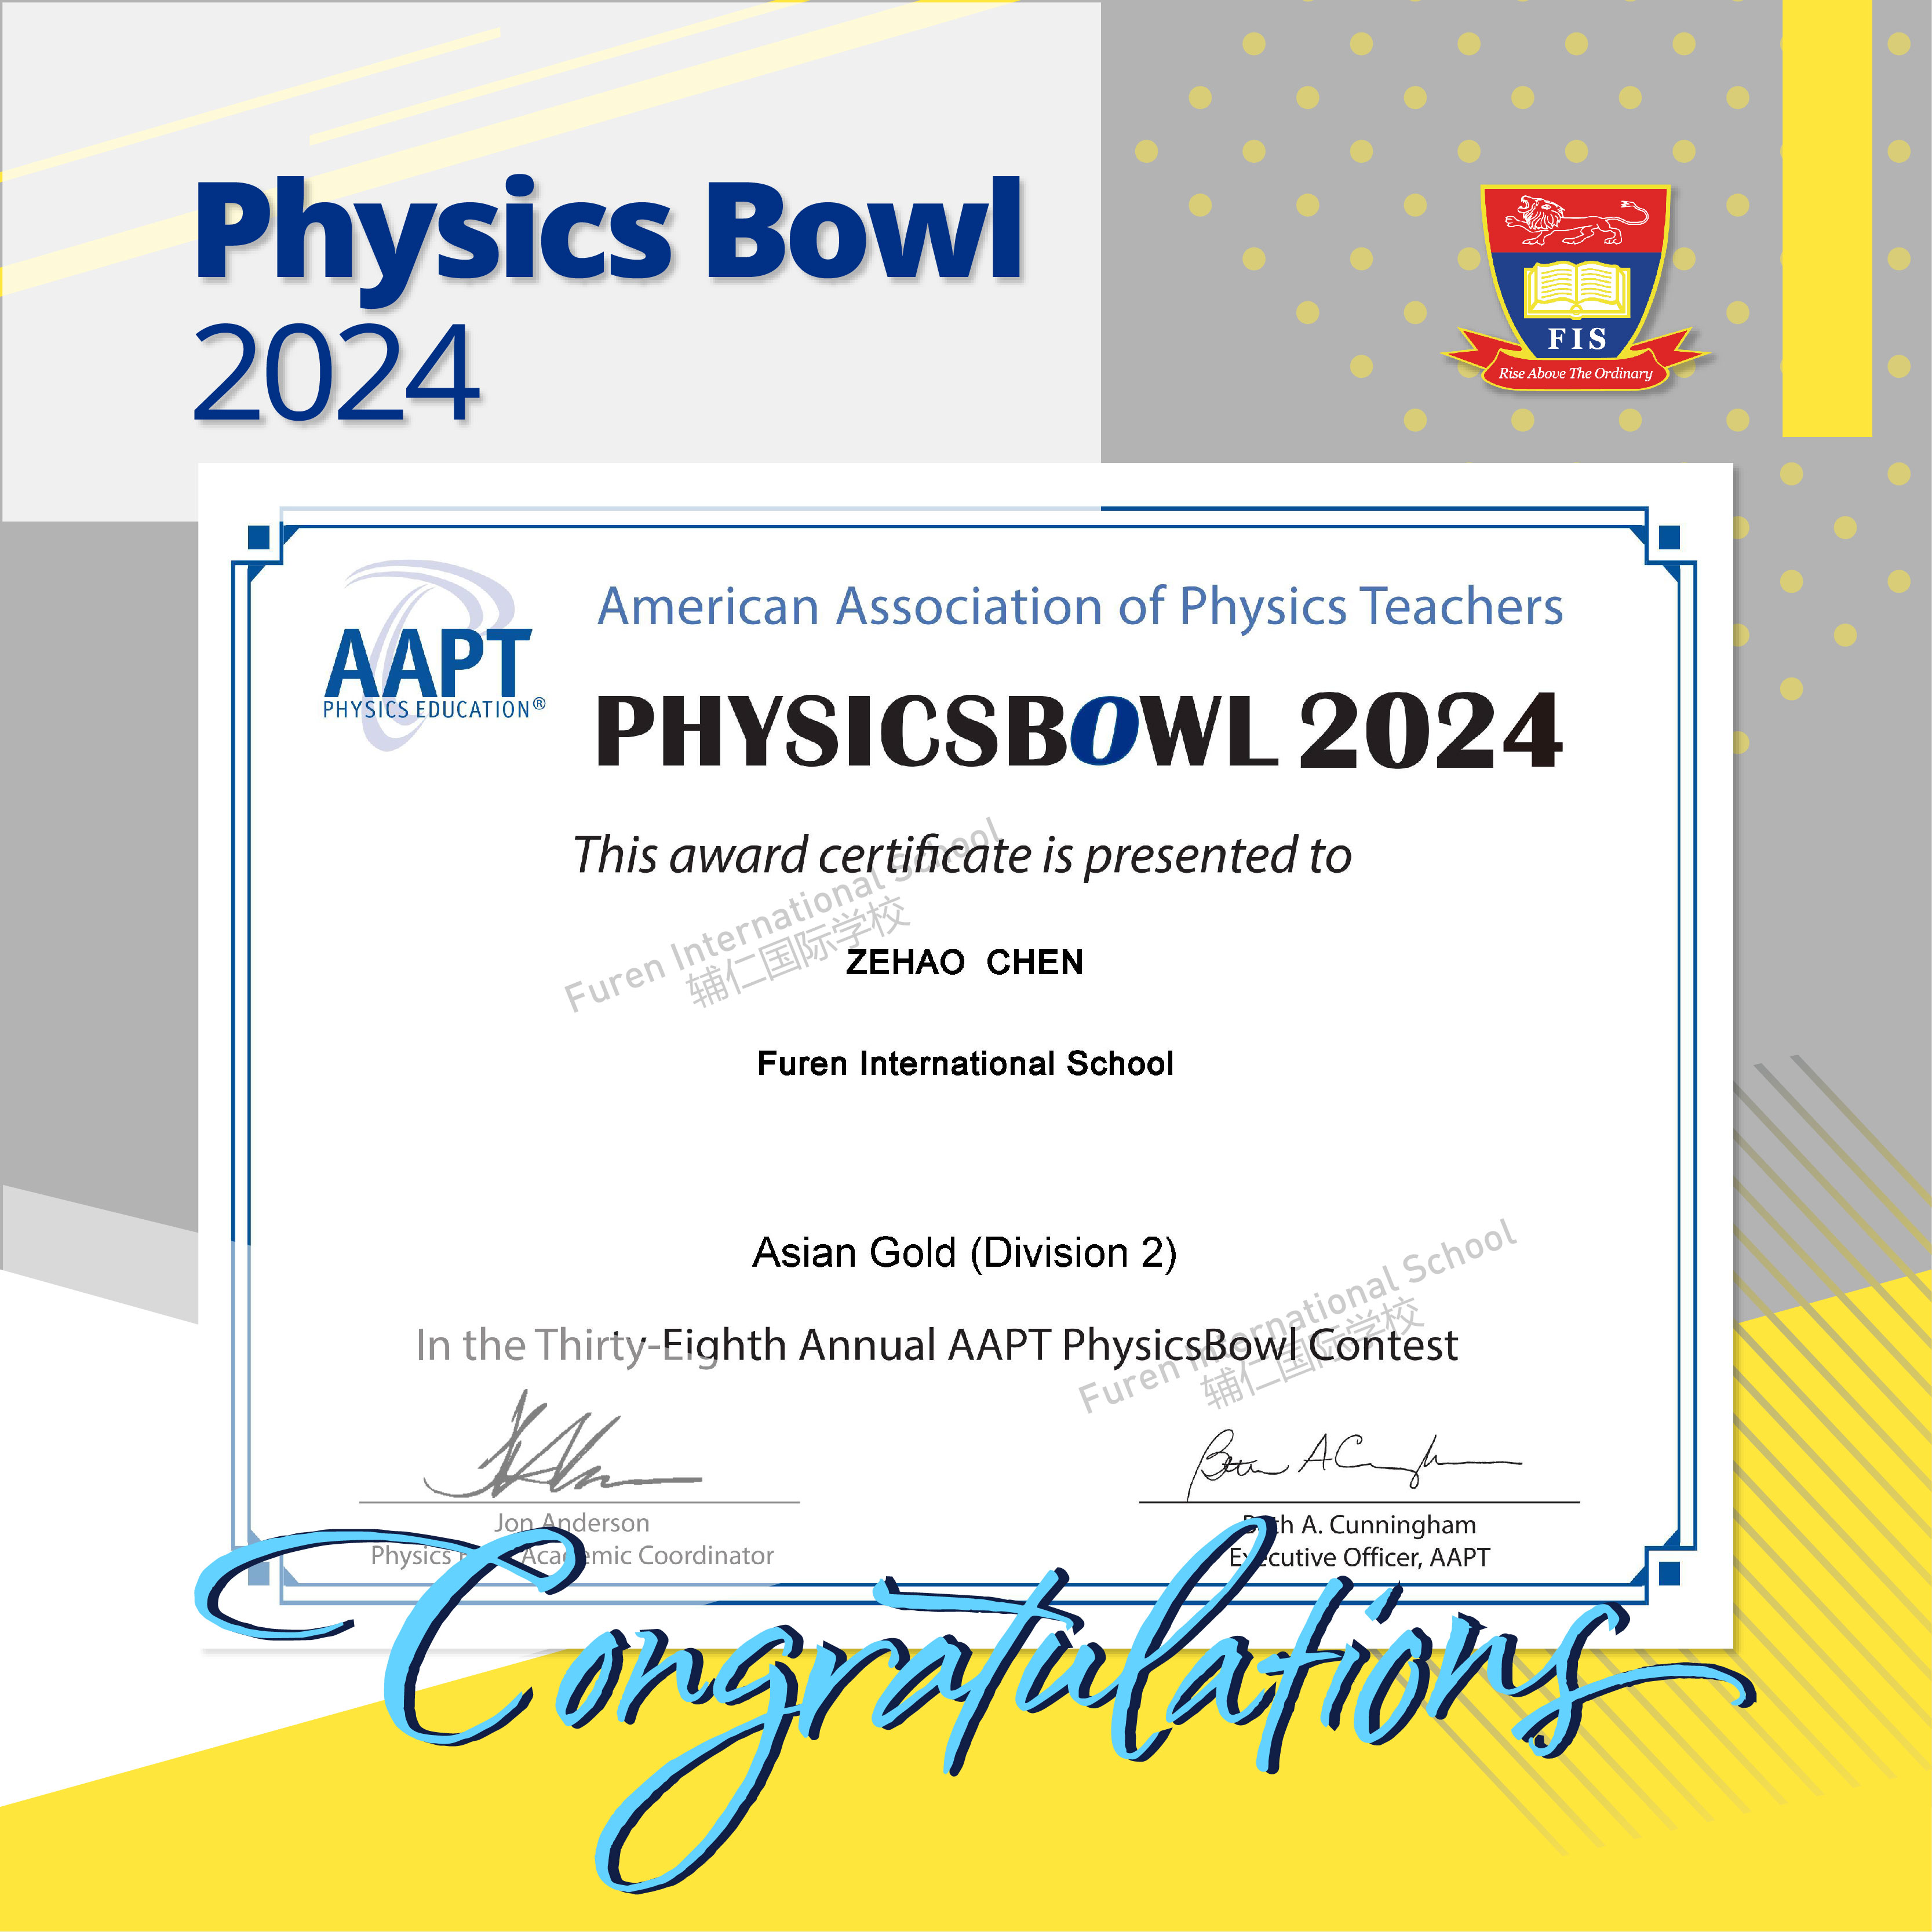 Congratulations! FIS students shine in the Physica Bowl!